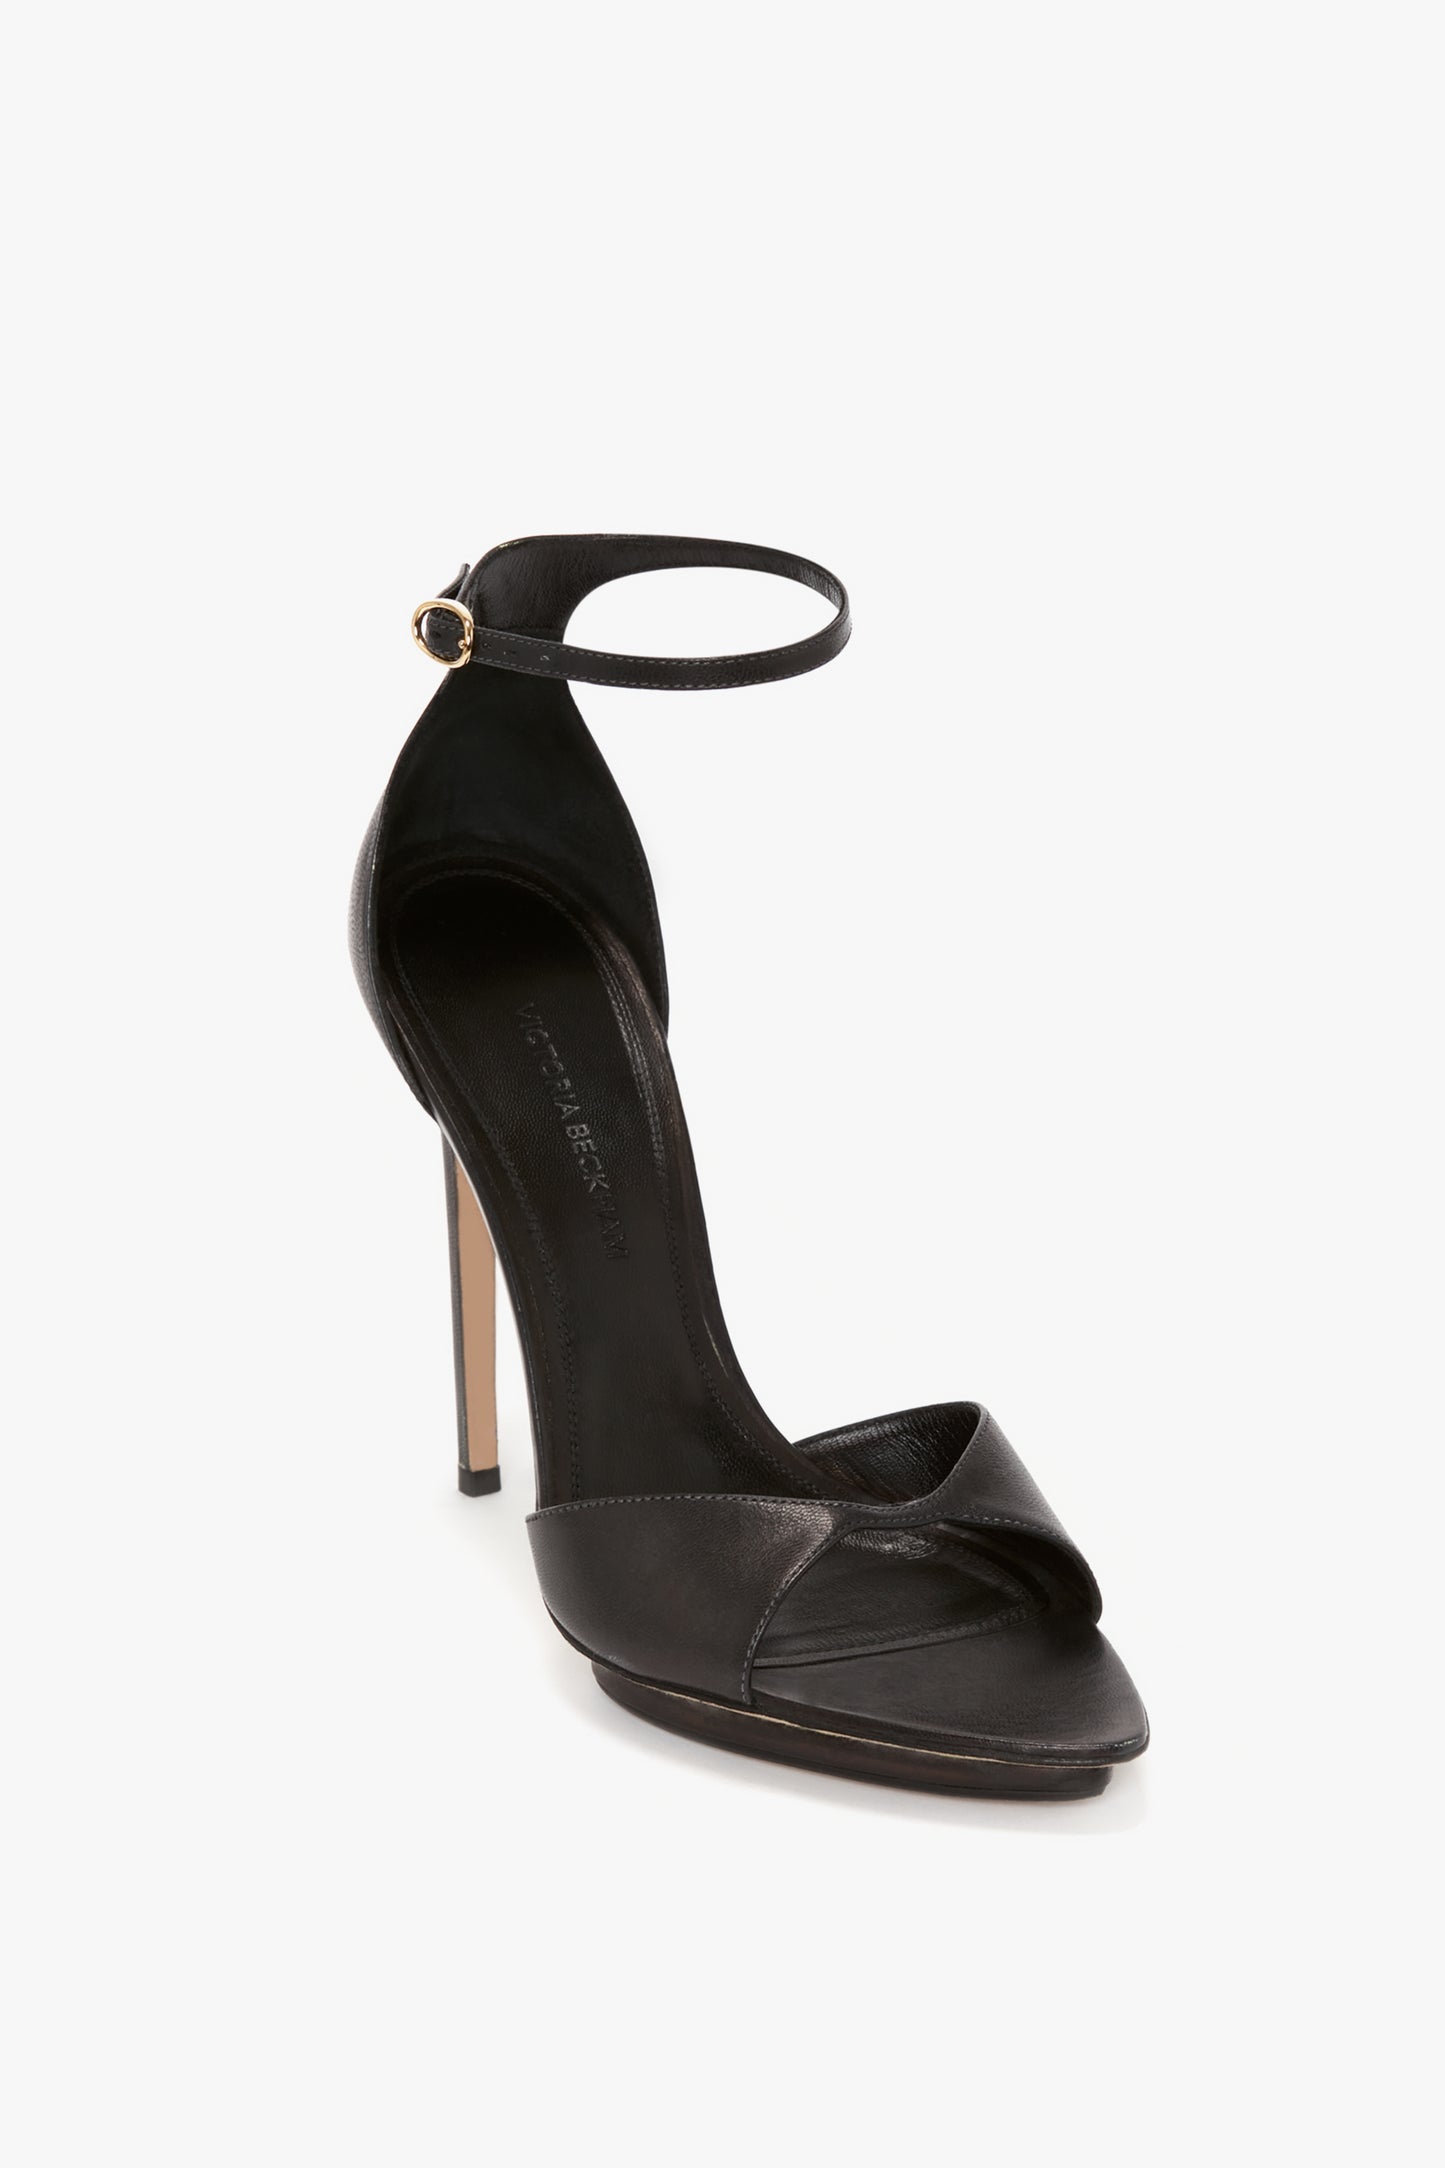 Pointy Toe Stiletto Sandal in Black Leather